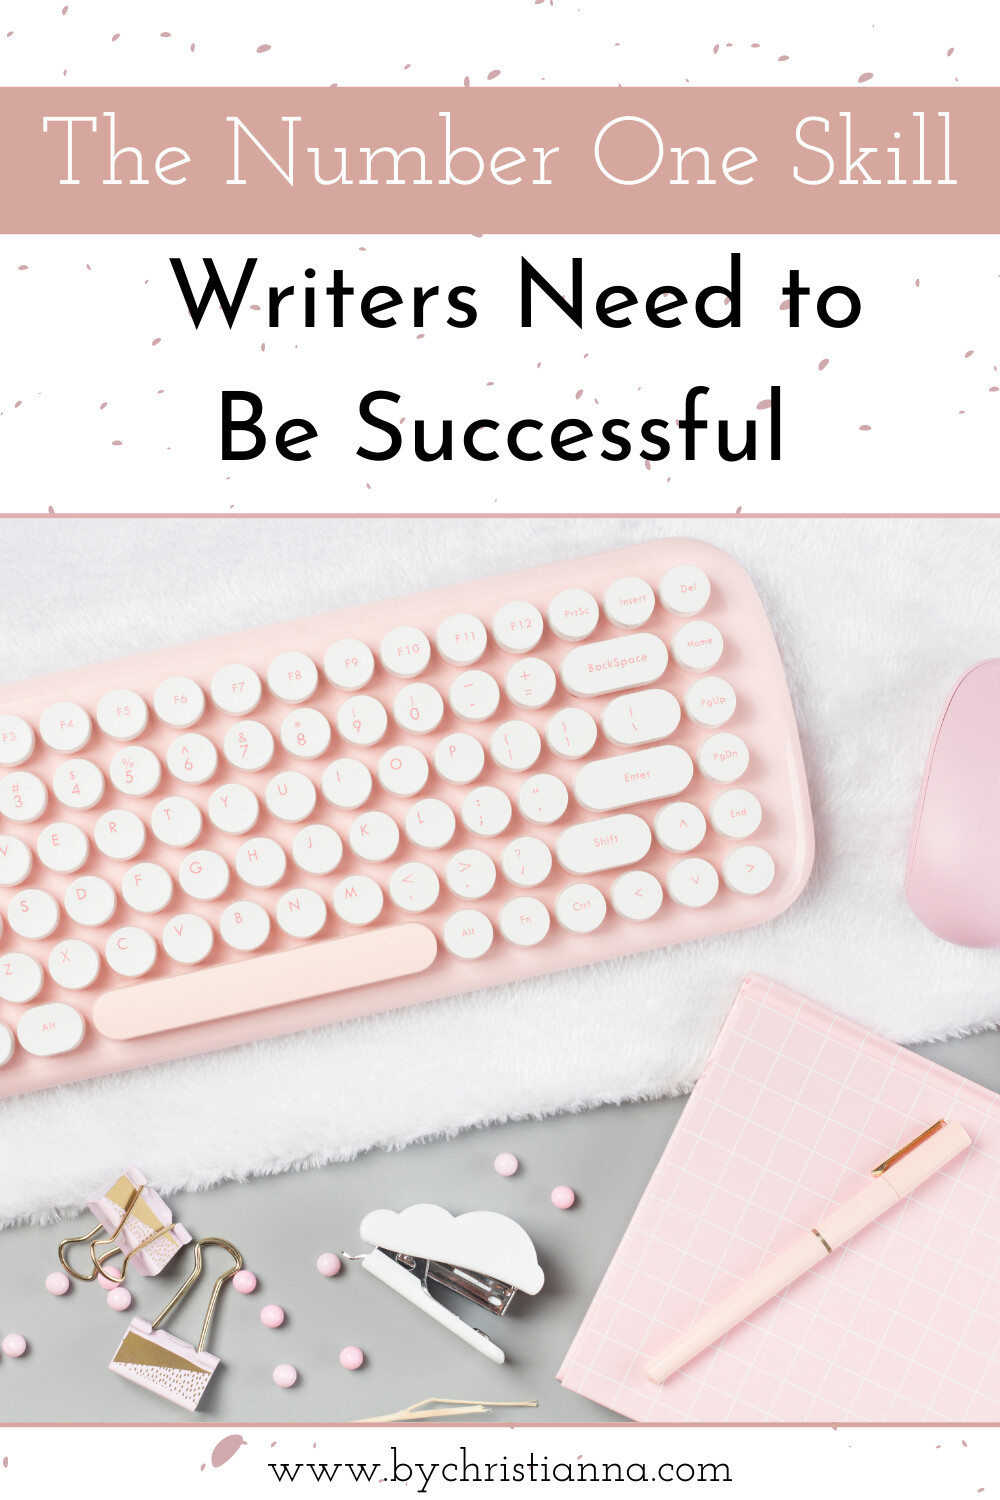 The Number One Skill Writers Need to Be Successful